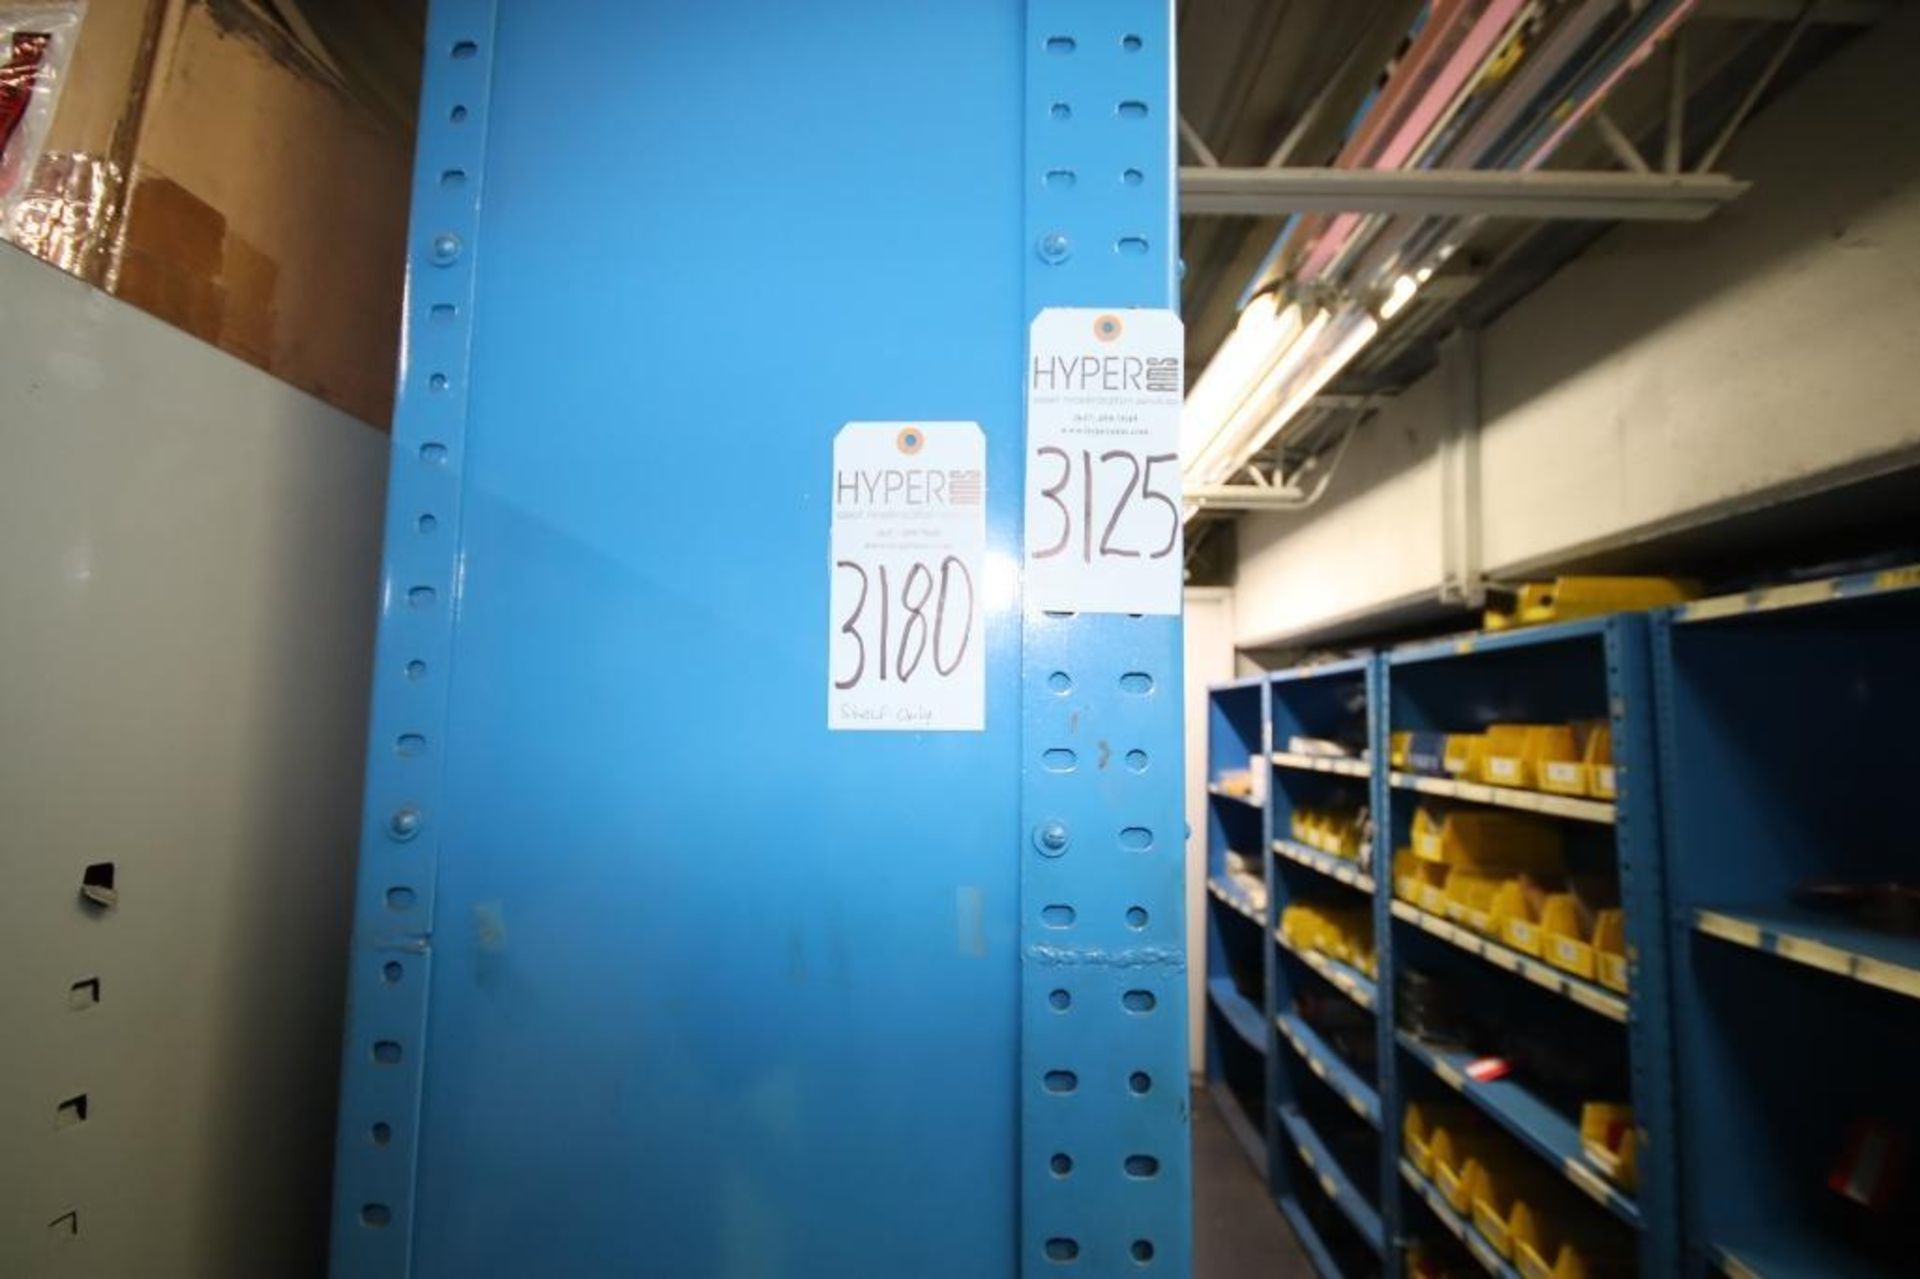 (5) Sections of Adjustable Shelve Units (163-166 & 285), SHELVES/RACKS ONLY-NO CONTENTS, LOCATED ON